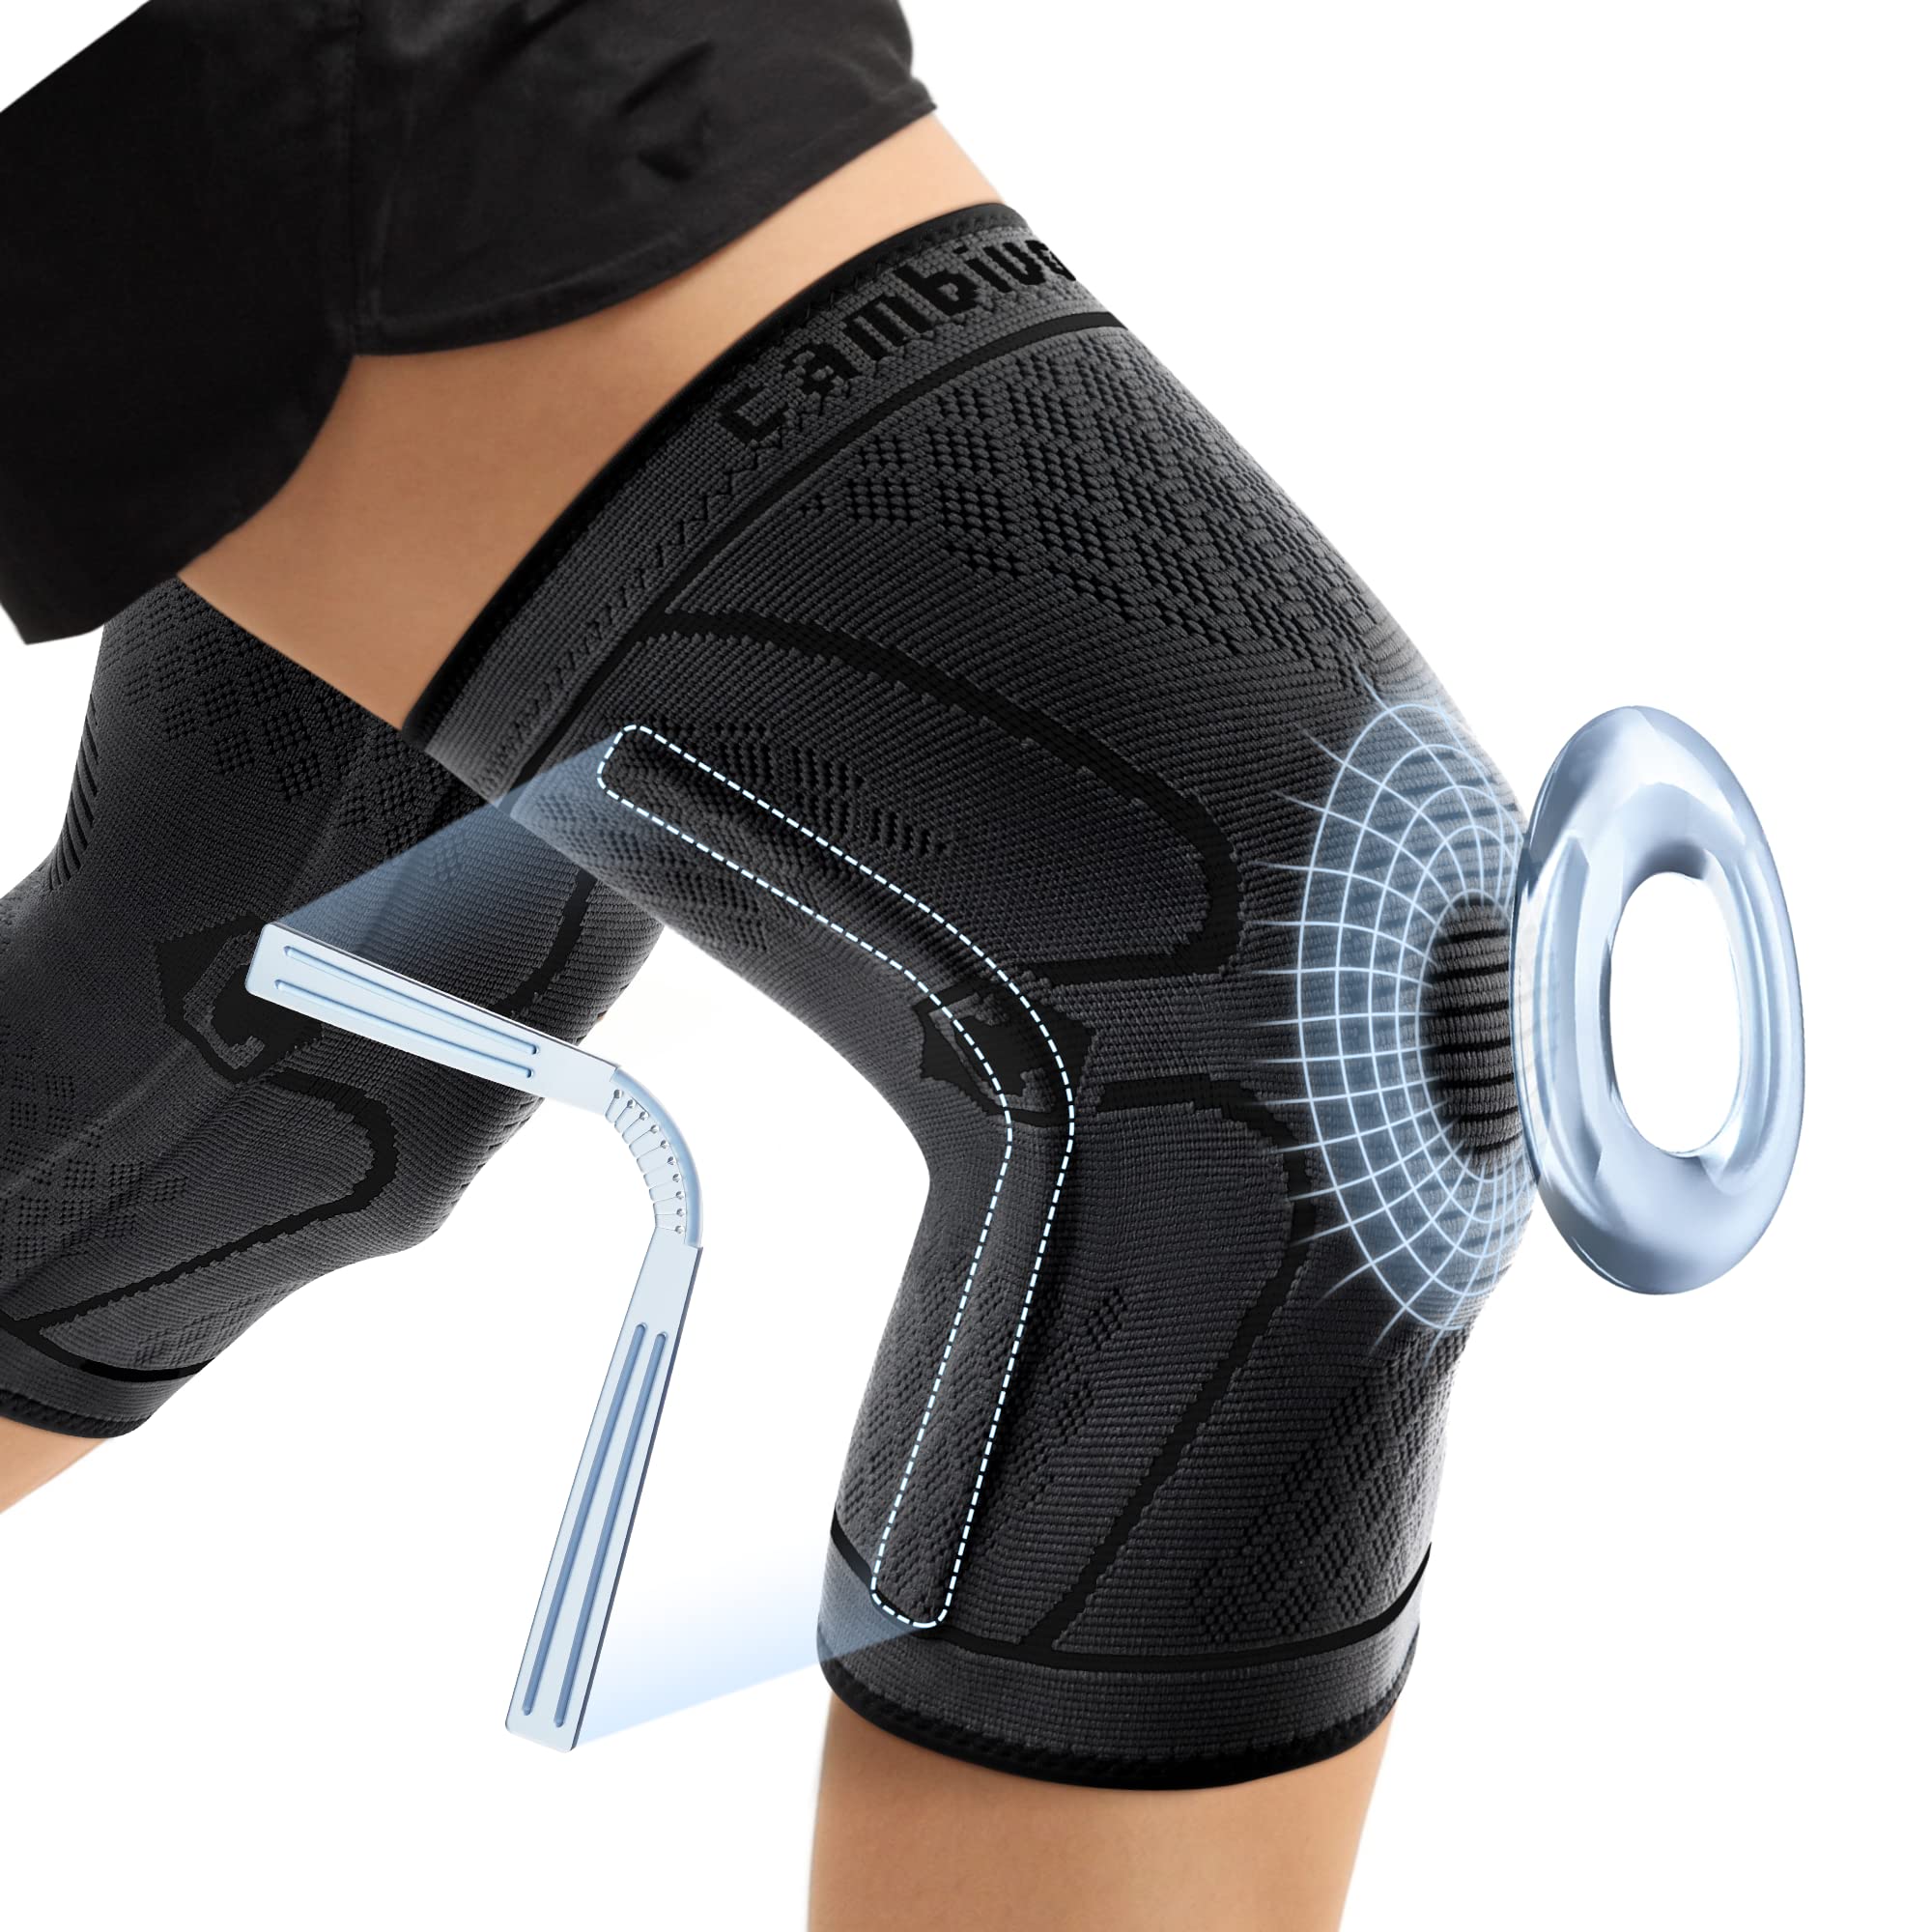 Knee Brace With Patella Gel and Stays Support for Knee Pain